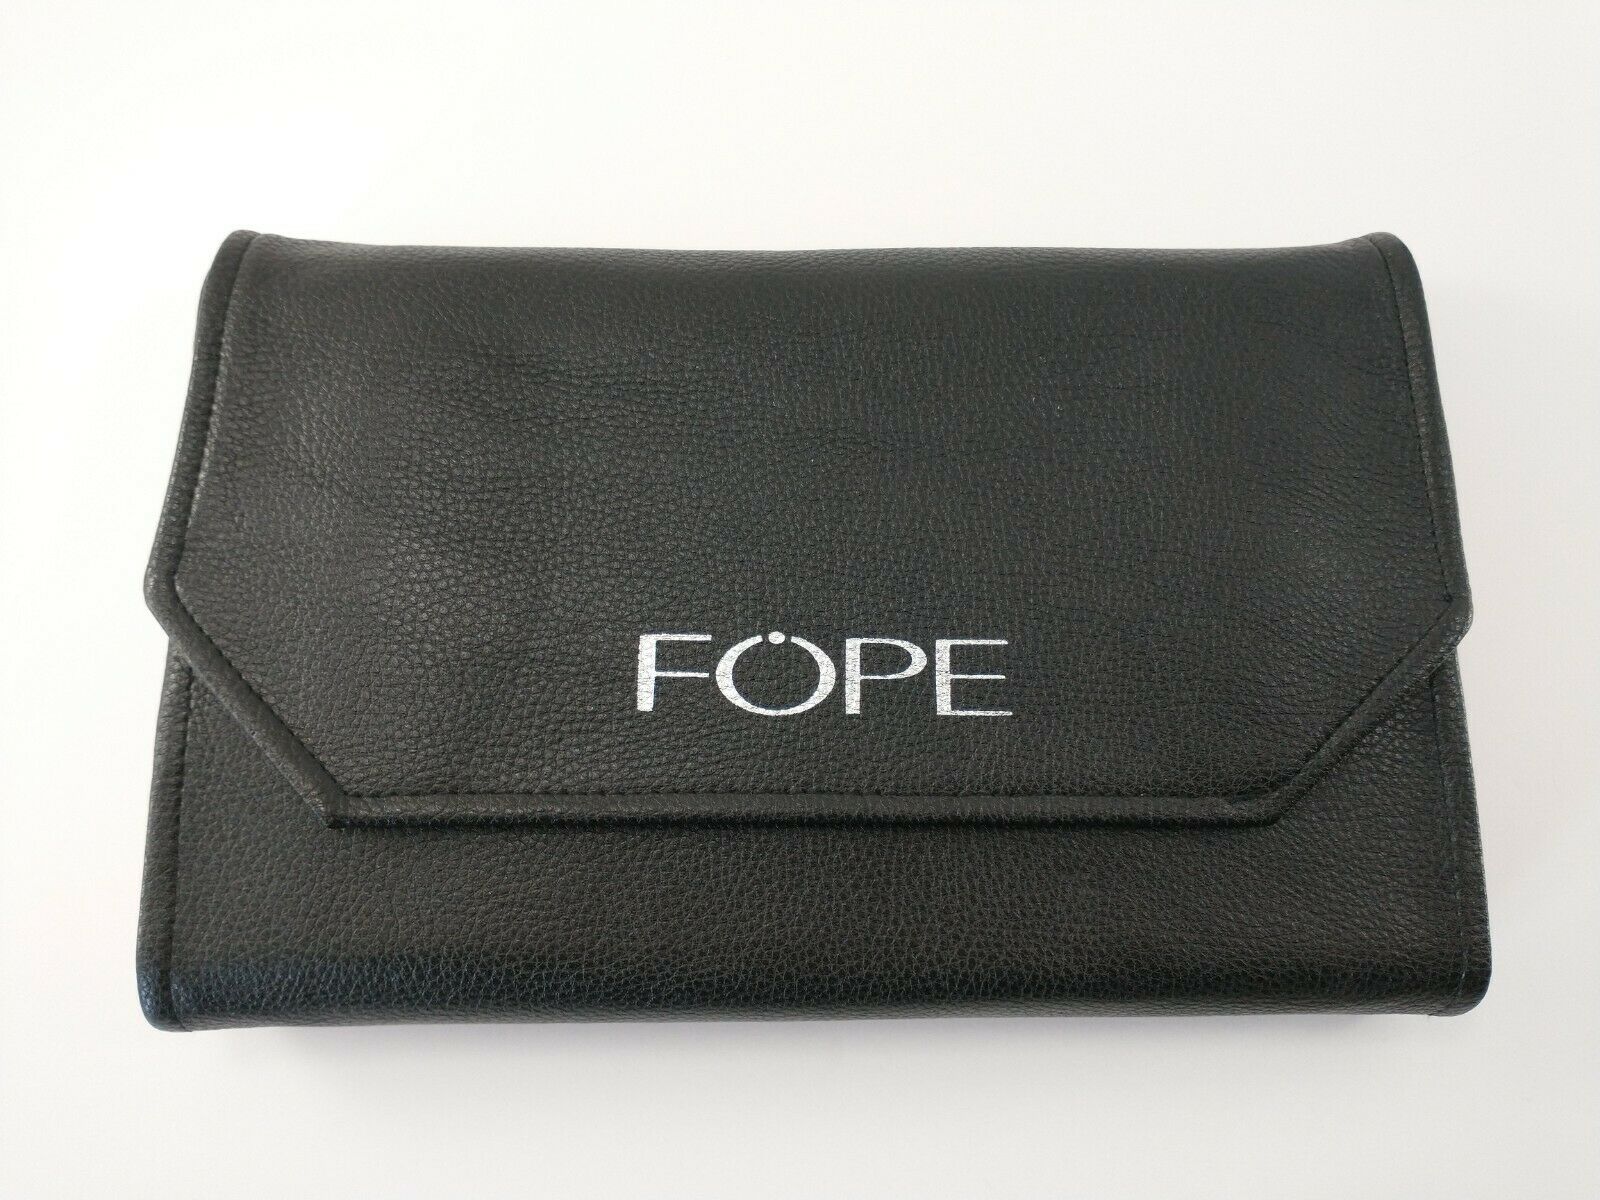 Genuine Fope Fold-up Necklace Jewelry Storage / Display / Carrying Case Rare!